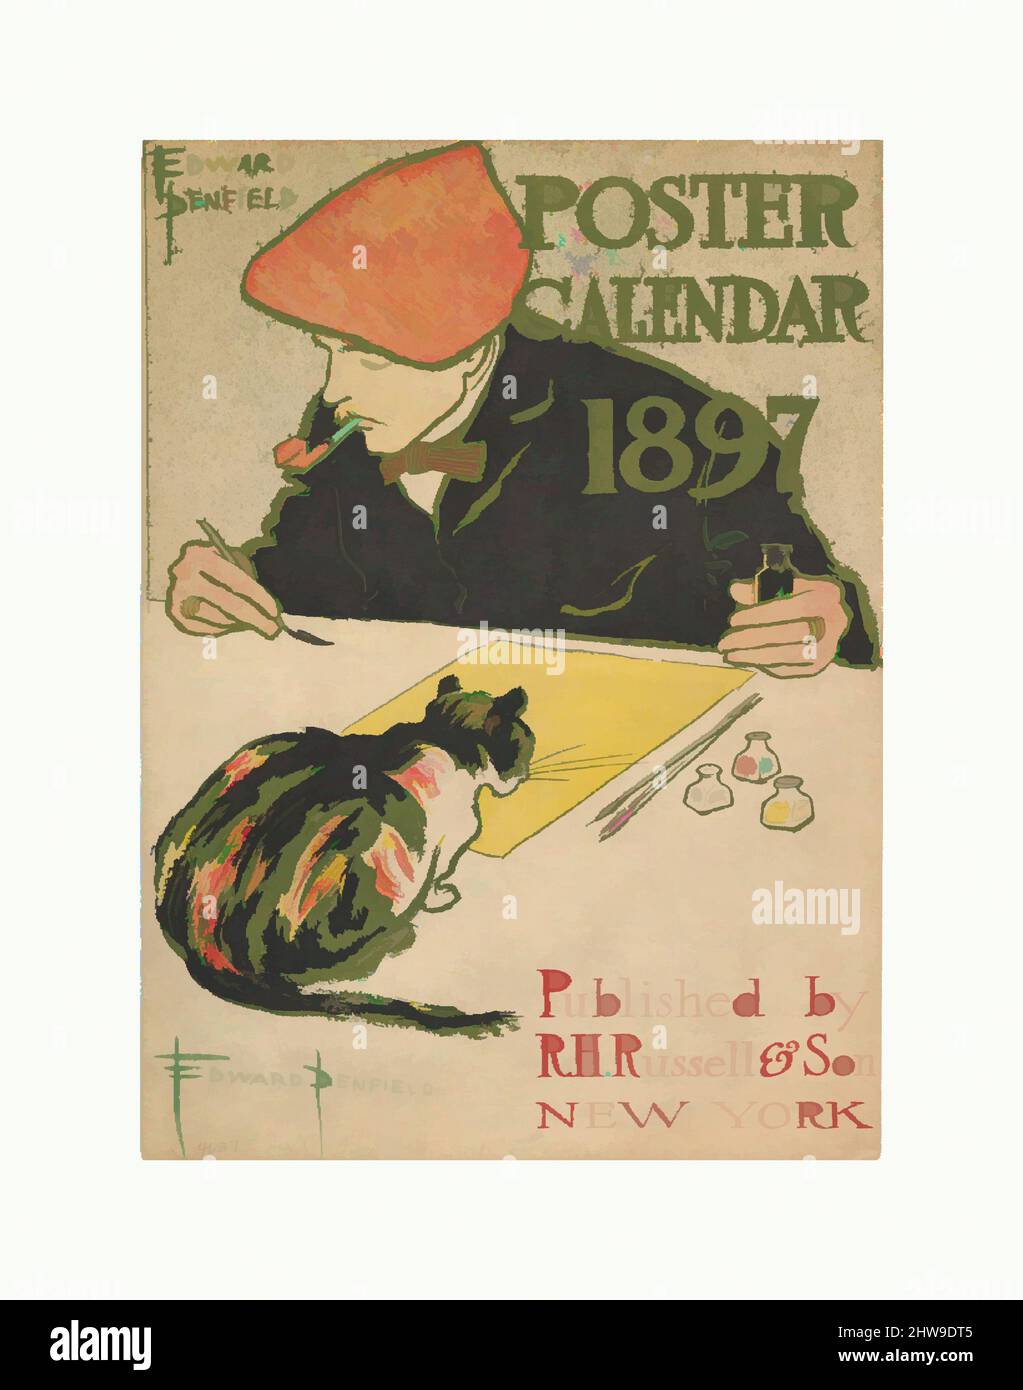 Art inspired by R.H. Russell & Son Calendar, 1897, 1896, Commerical relief and lithograph, Sheet: 17 3/8 × 12 1/16 in. (44.1 × 30.6 cm), Edward Penfield (American, Brooklyn, New York 1866–1925 Beacon, New York, Classic works modernized by Artotop with a splash of modernity. Shapes, color and value, eye-catching visual impact on art. Emotions through freedom of artworks in a contemporary way. A timeless message pursuing a wildly creative new direction. Artists turning to the digital medium and creating the Artotop NFT Stock Photo